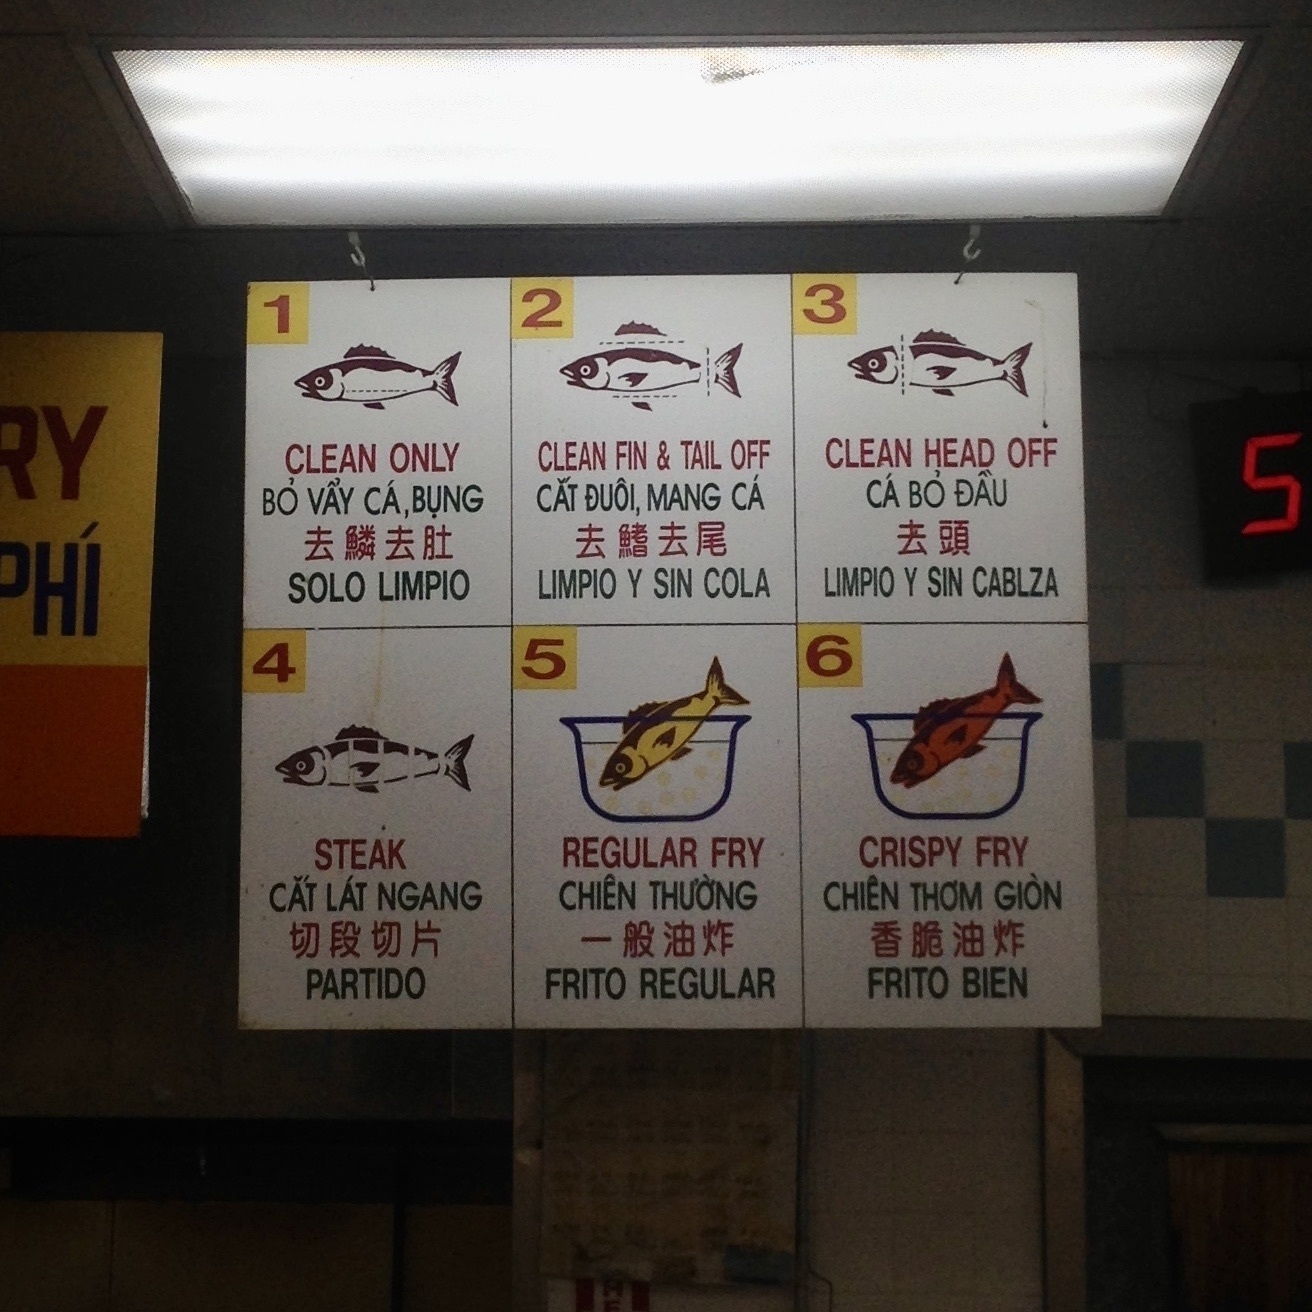 A sign at a supermarket seafood counter shows 6 preparation options in English, Vietnamese, Chinese, and Spanish. Option 6 is 'Crispy Fry'.